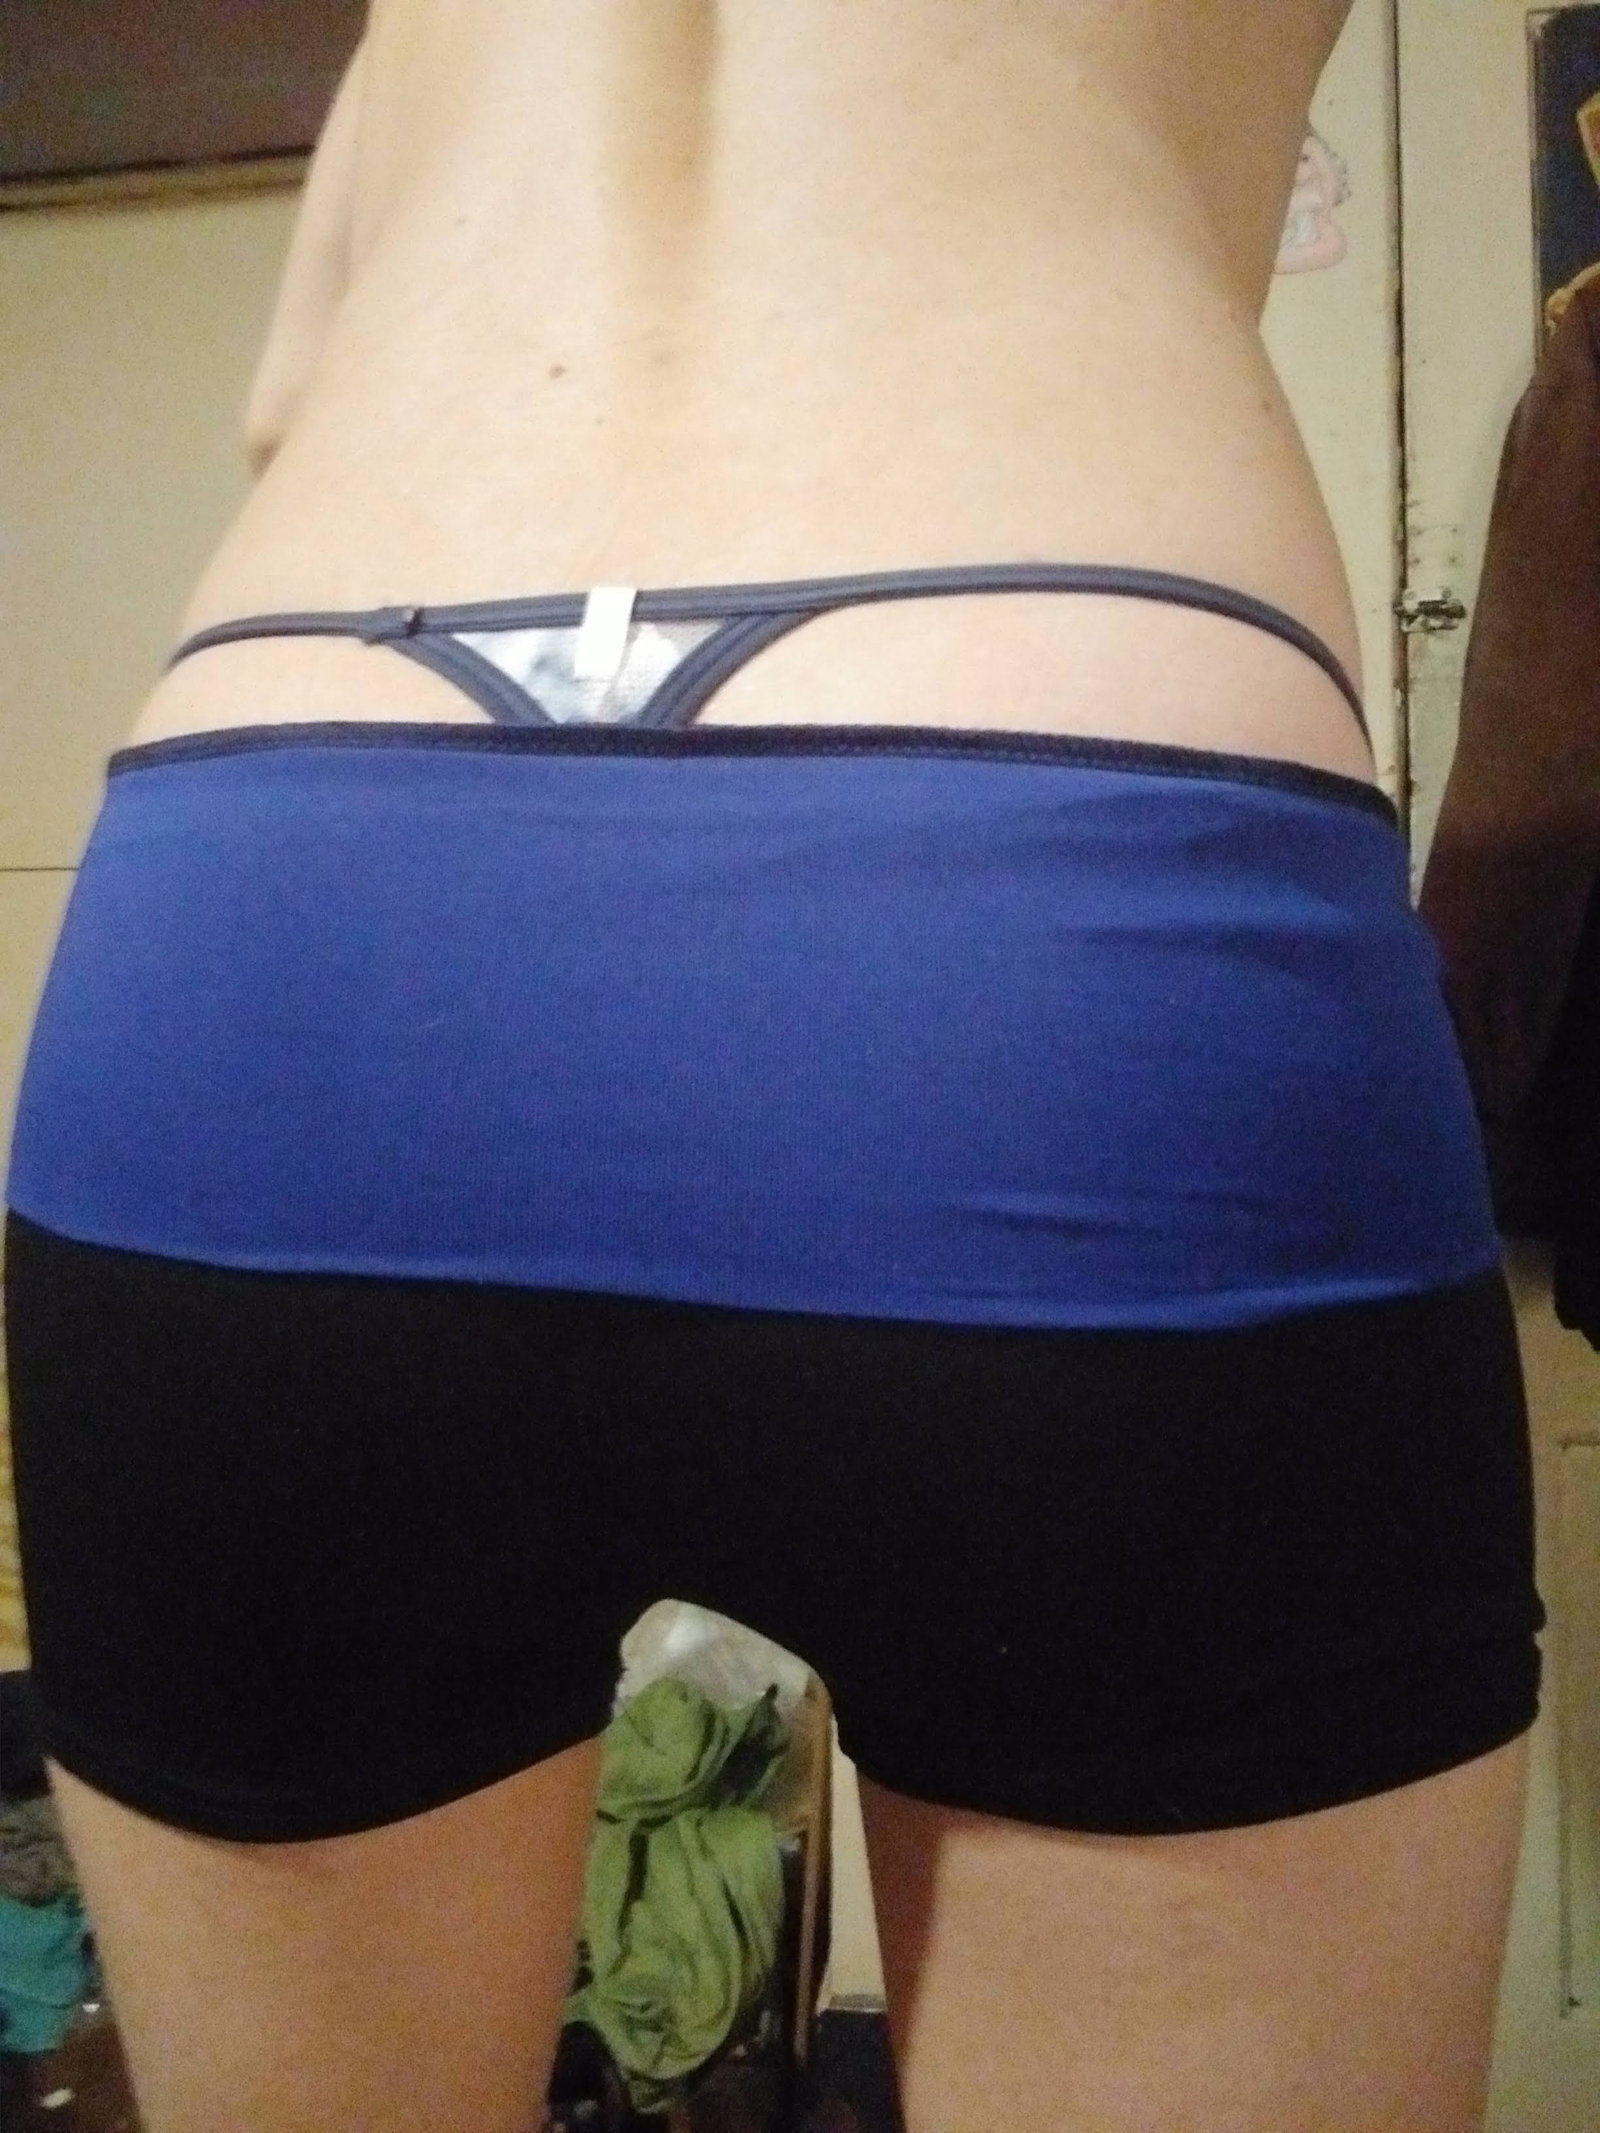 Photo by Femboythong88 with the username @Femboythong1988,  September 6, 2020 at 10:01 PM. The post is about the topic Sexiestamateurcrossdressers and the text says 'my booty in my blue and white V-String and yoga shorts with my v-string showing'